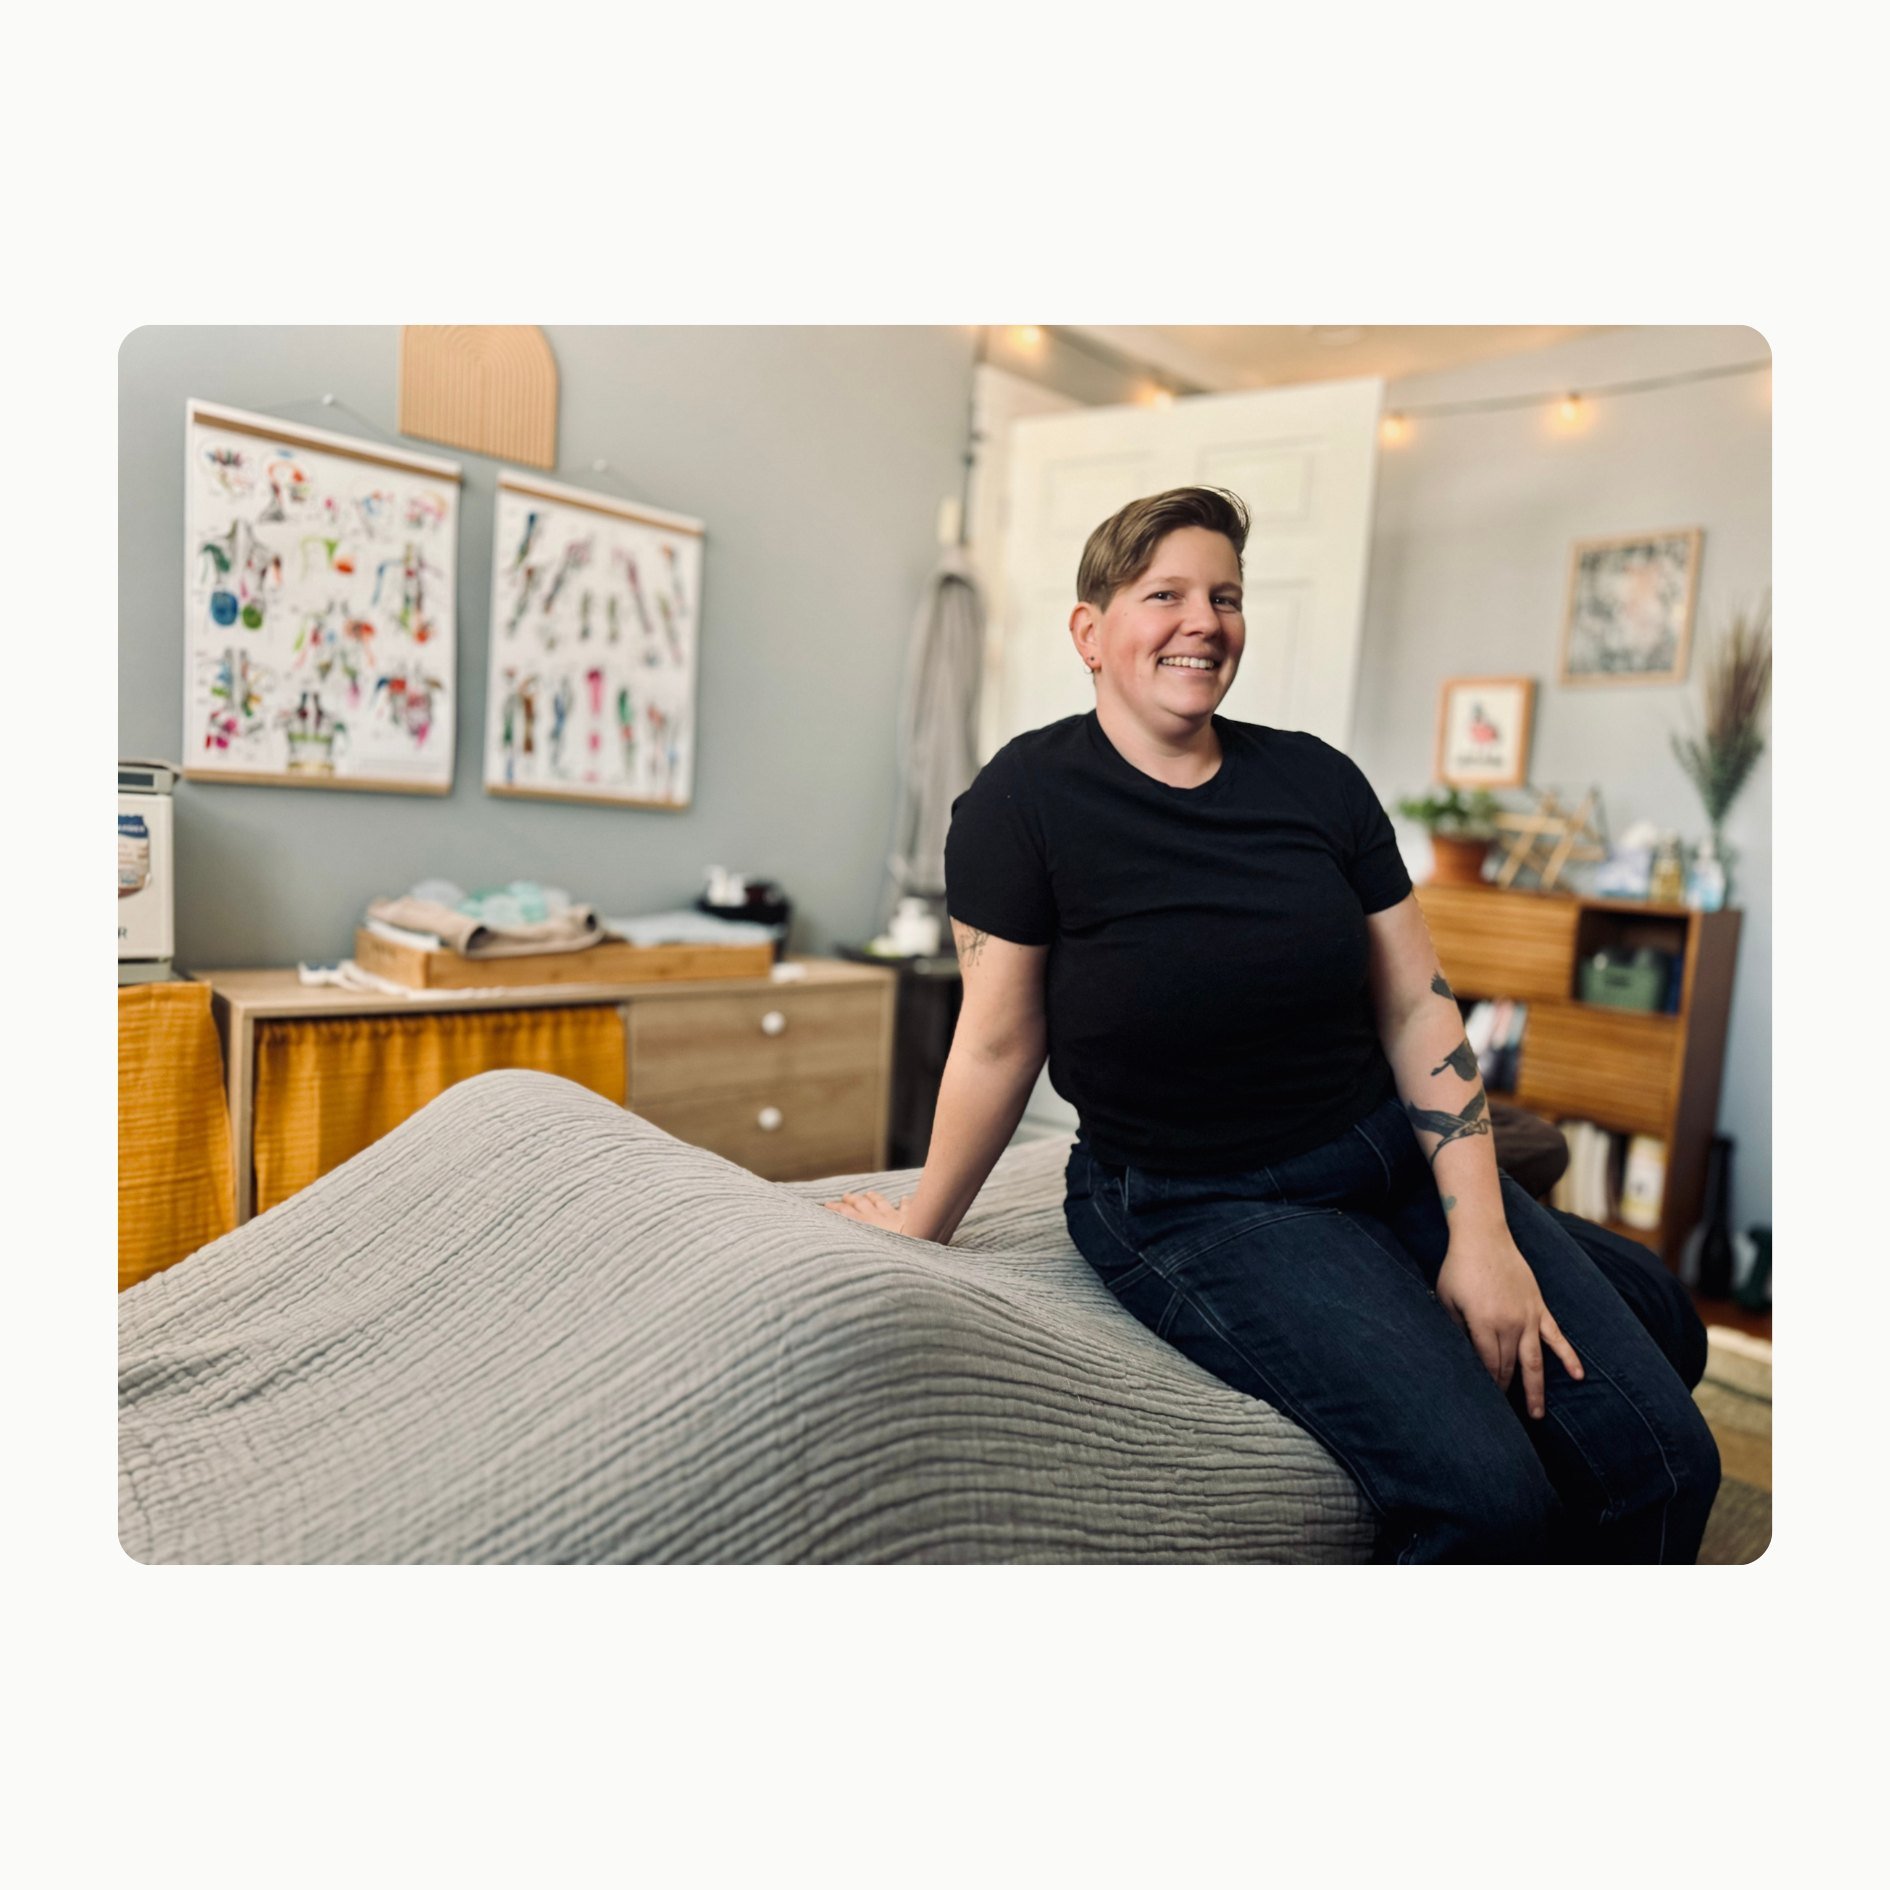 Jae Friedman (she/they) of @jf_bodywork is a NY State Licensed Massage Therapist in Madison, NY. Jae offers massage therapy for folks looking to relax, work through chronic pain or tension, and (re)connect with their bodies. With her body-neutral len